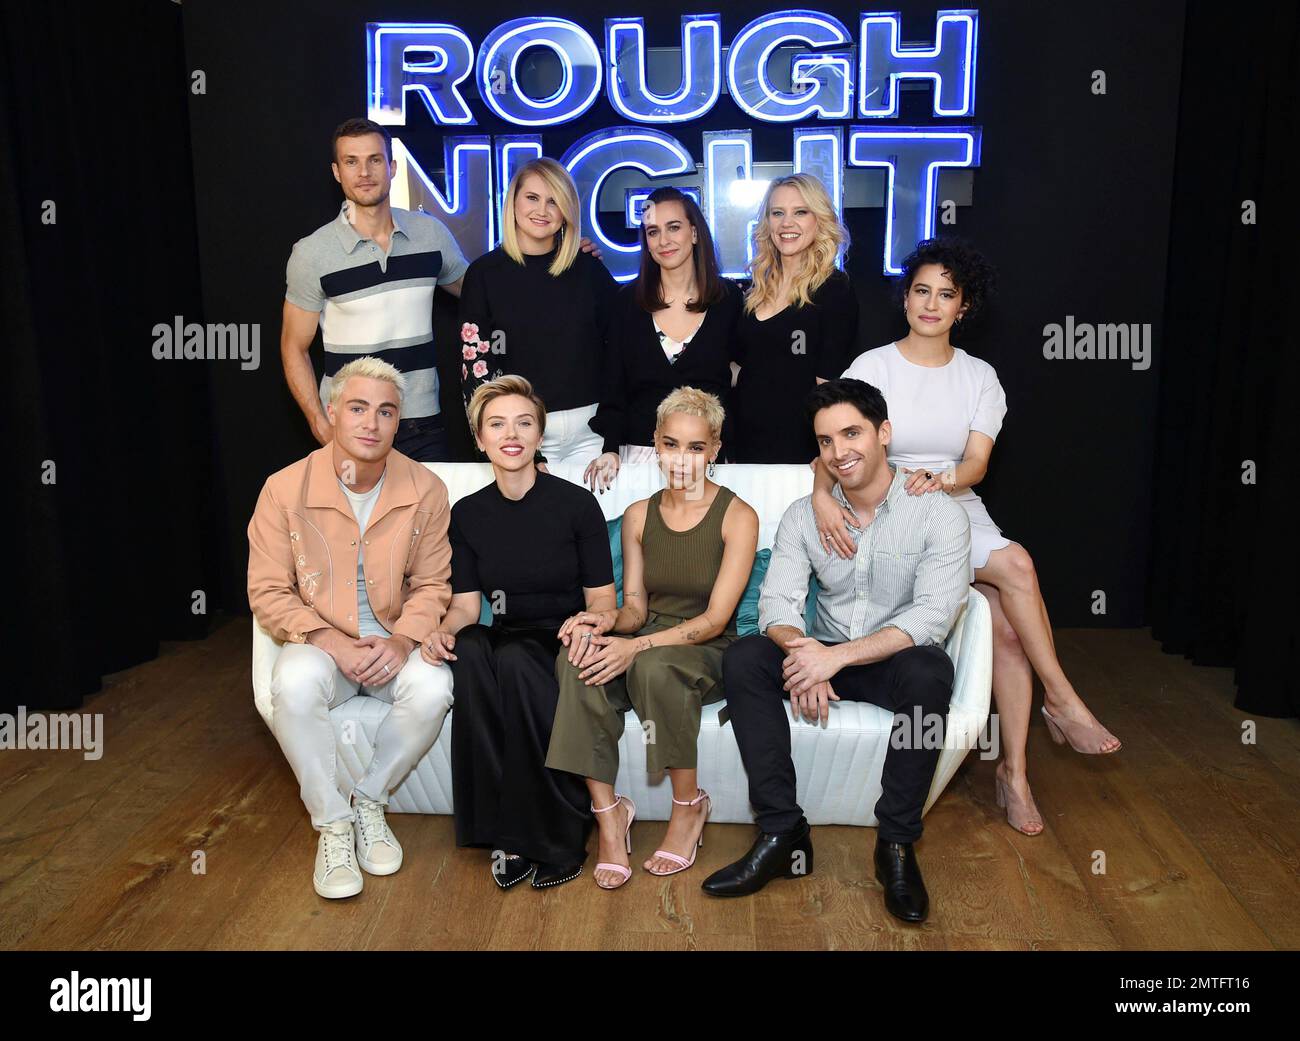 Rough Night cast members, from left back row, Ryan Cooper